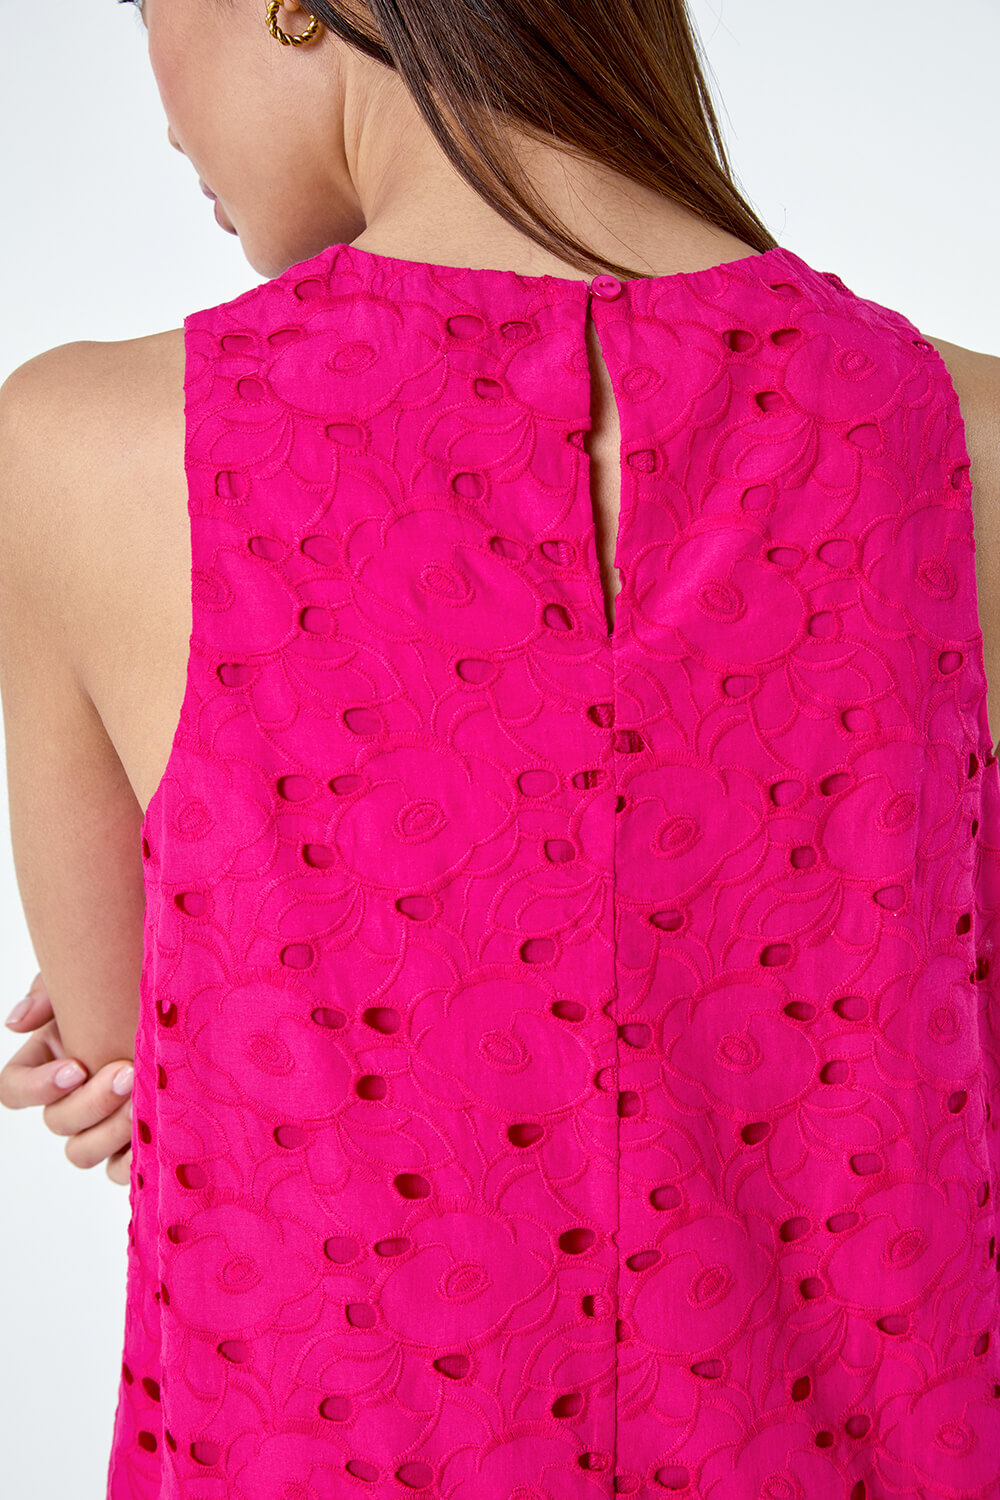 CERISE Cotton Embroidery Detail Shift Dress, Image 5 of 5